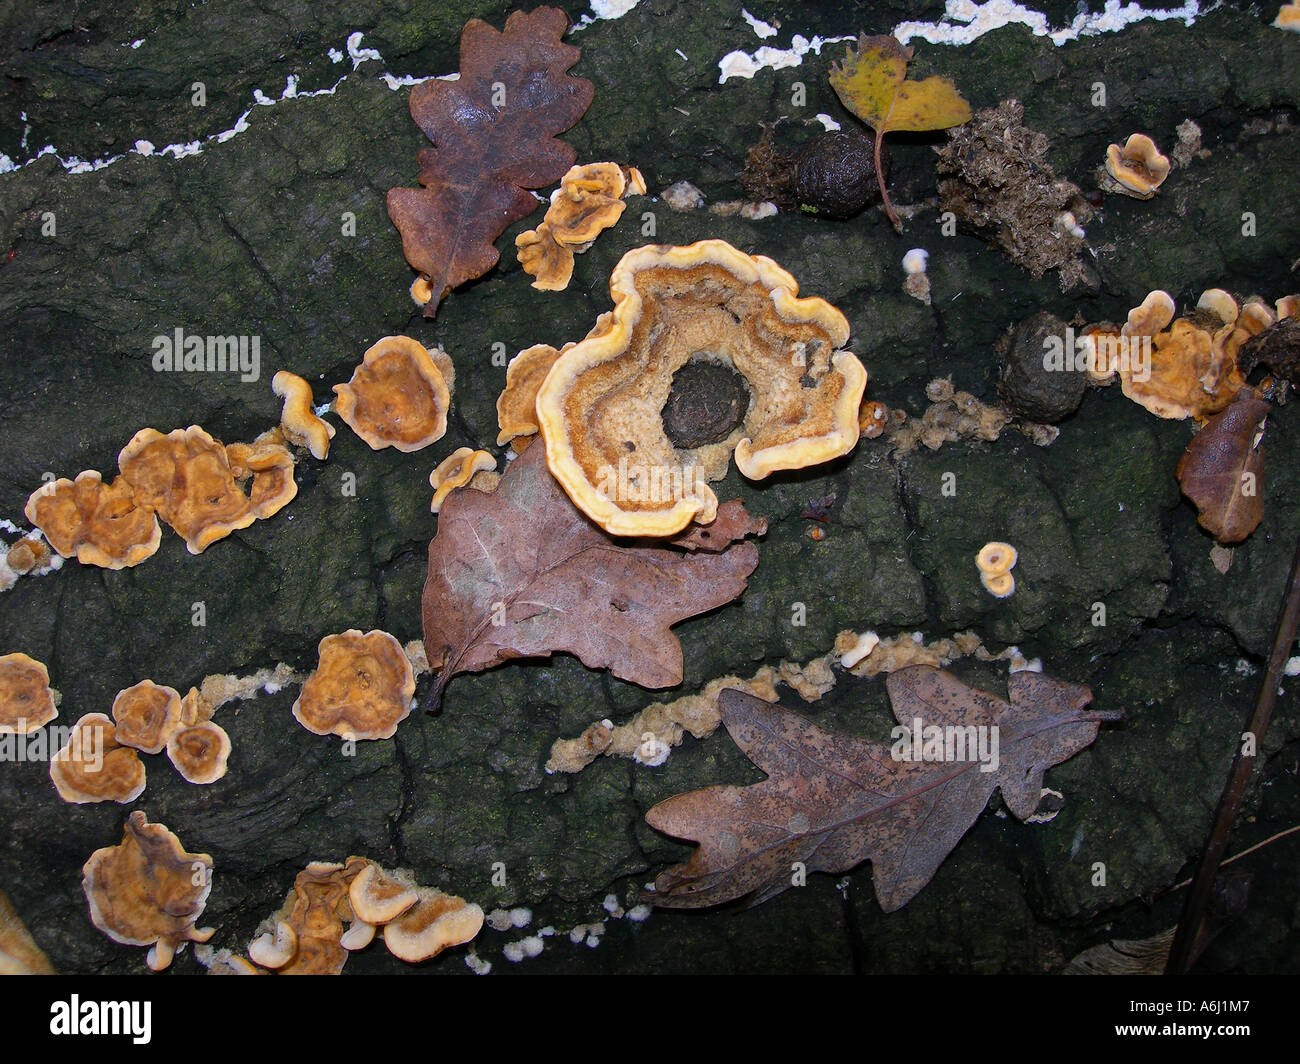 Fungus on rotting tree stump in deciduous forest. Stock Photo